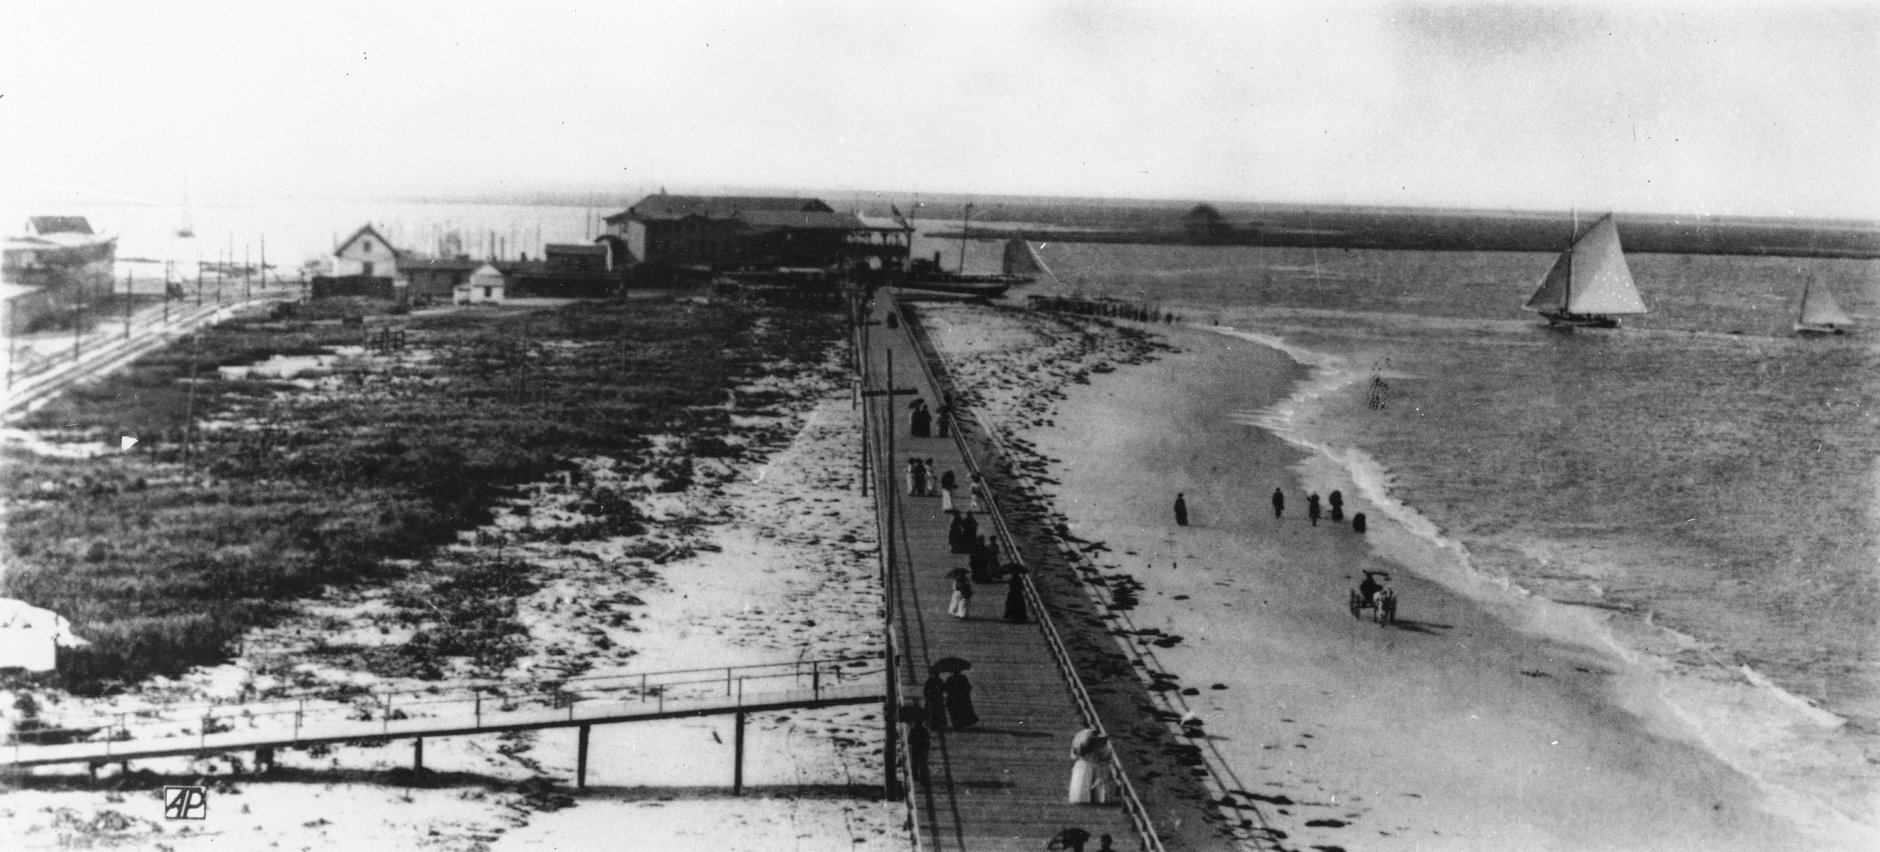 People strolling the boardwalk in Atlantic City, N.J., carry black umbrellas to ward off the sun, as horse drawn buggies wheel up and down the sandy beaches and picturesque sailboats float on the horizon, in 1895. Exact date is unknown. (AP Photo)